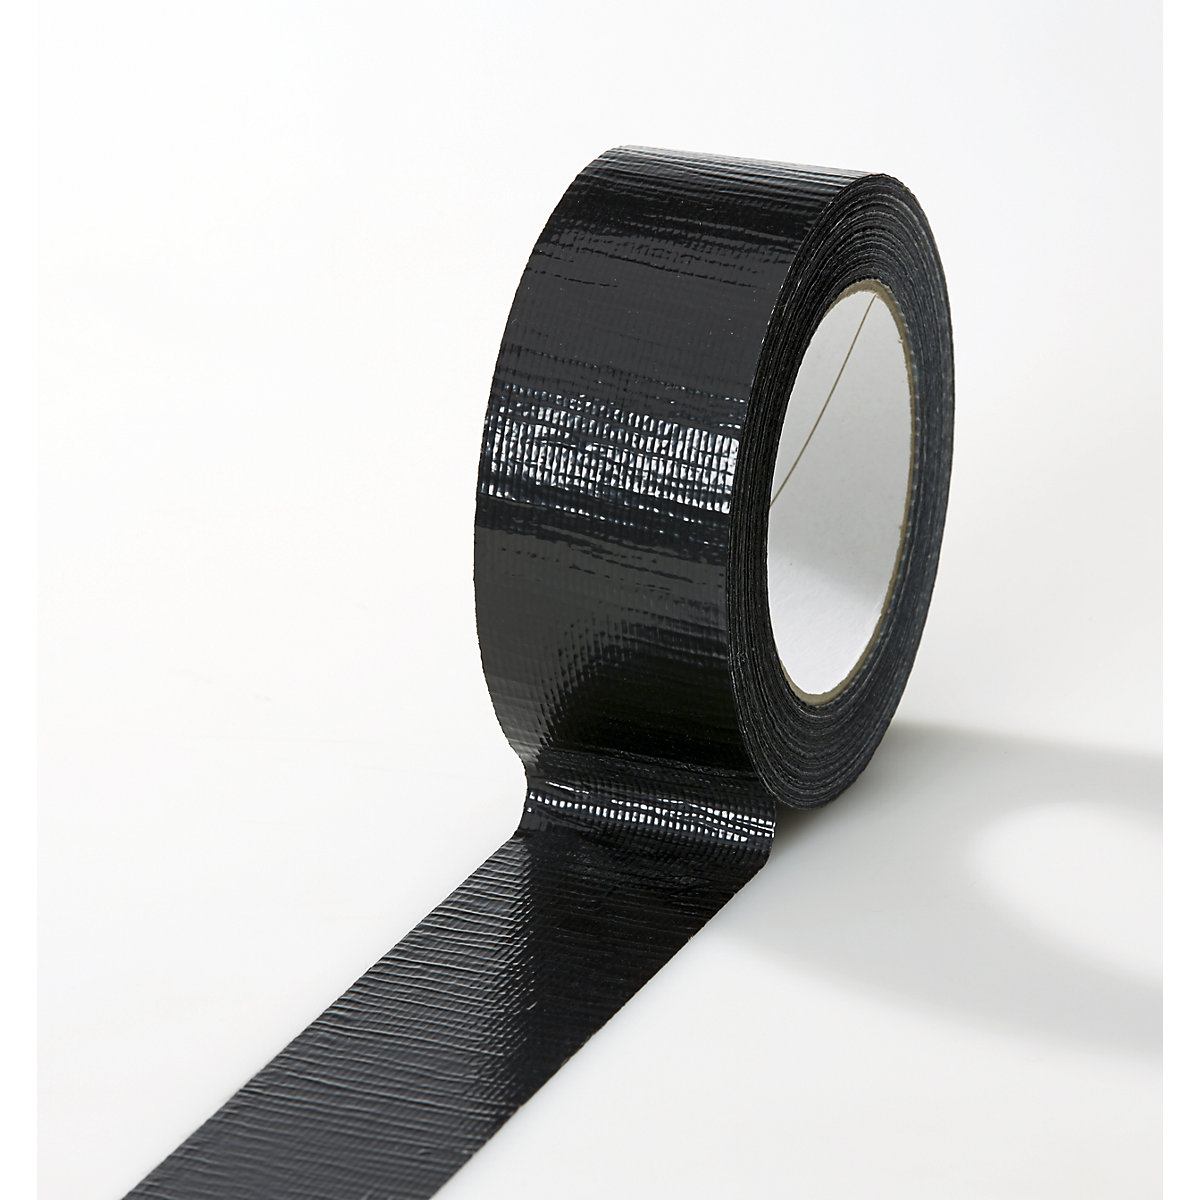 Fabric tape, in different colours, pack of 24 rolls, black, tape width 38 mm-2